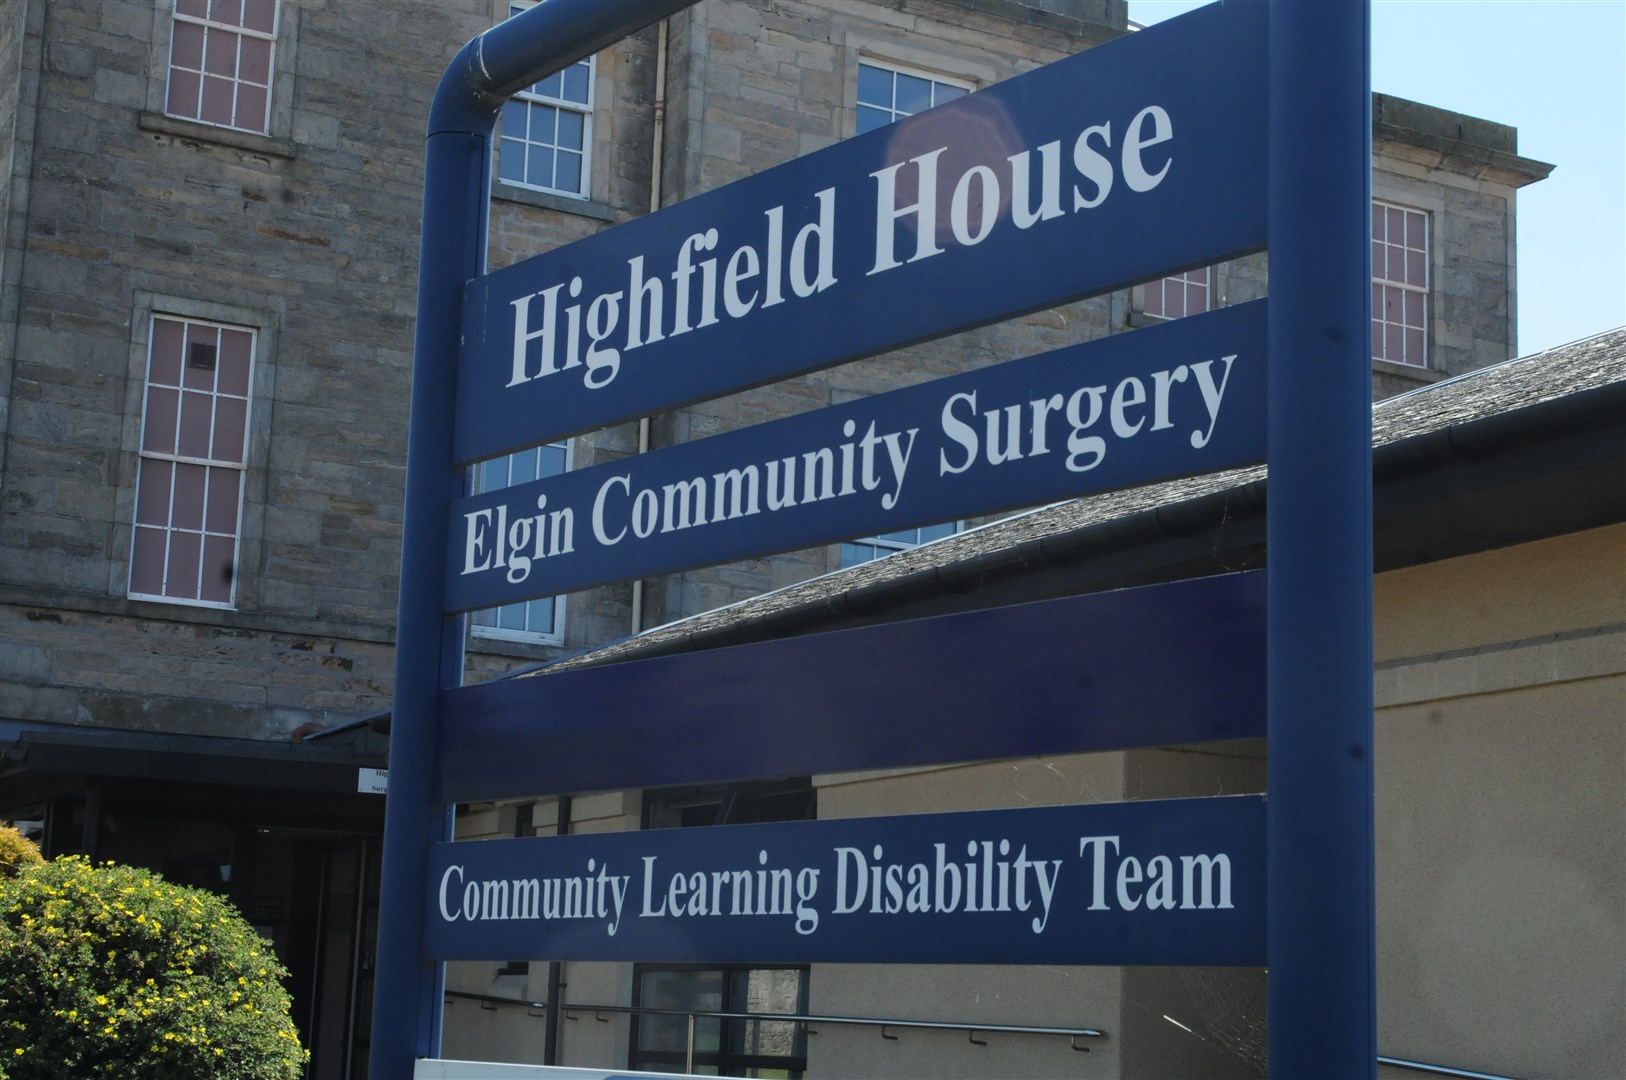 The Elgin Community Surgery is shutting its front door to general access.